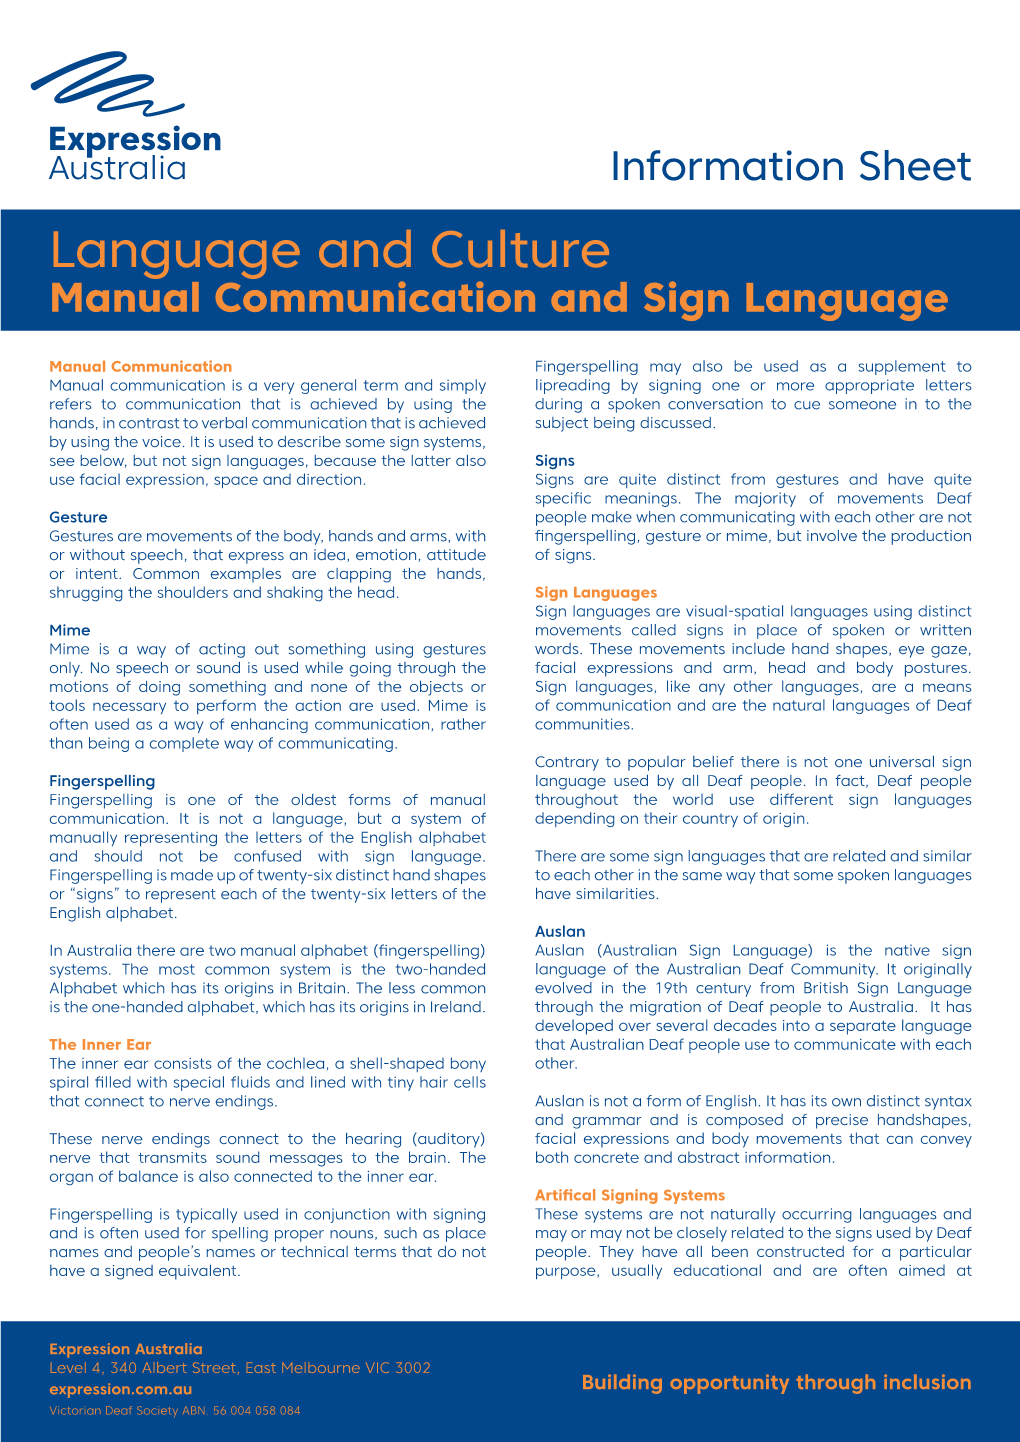 Language and Culture Manual Communication and Sign Language